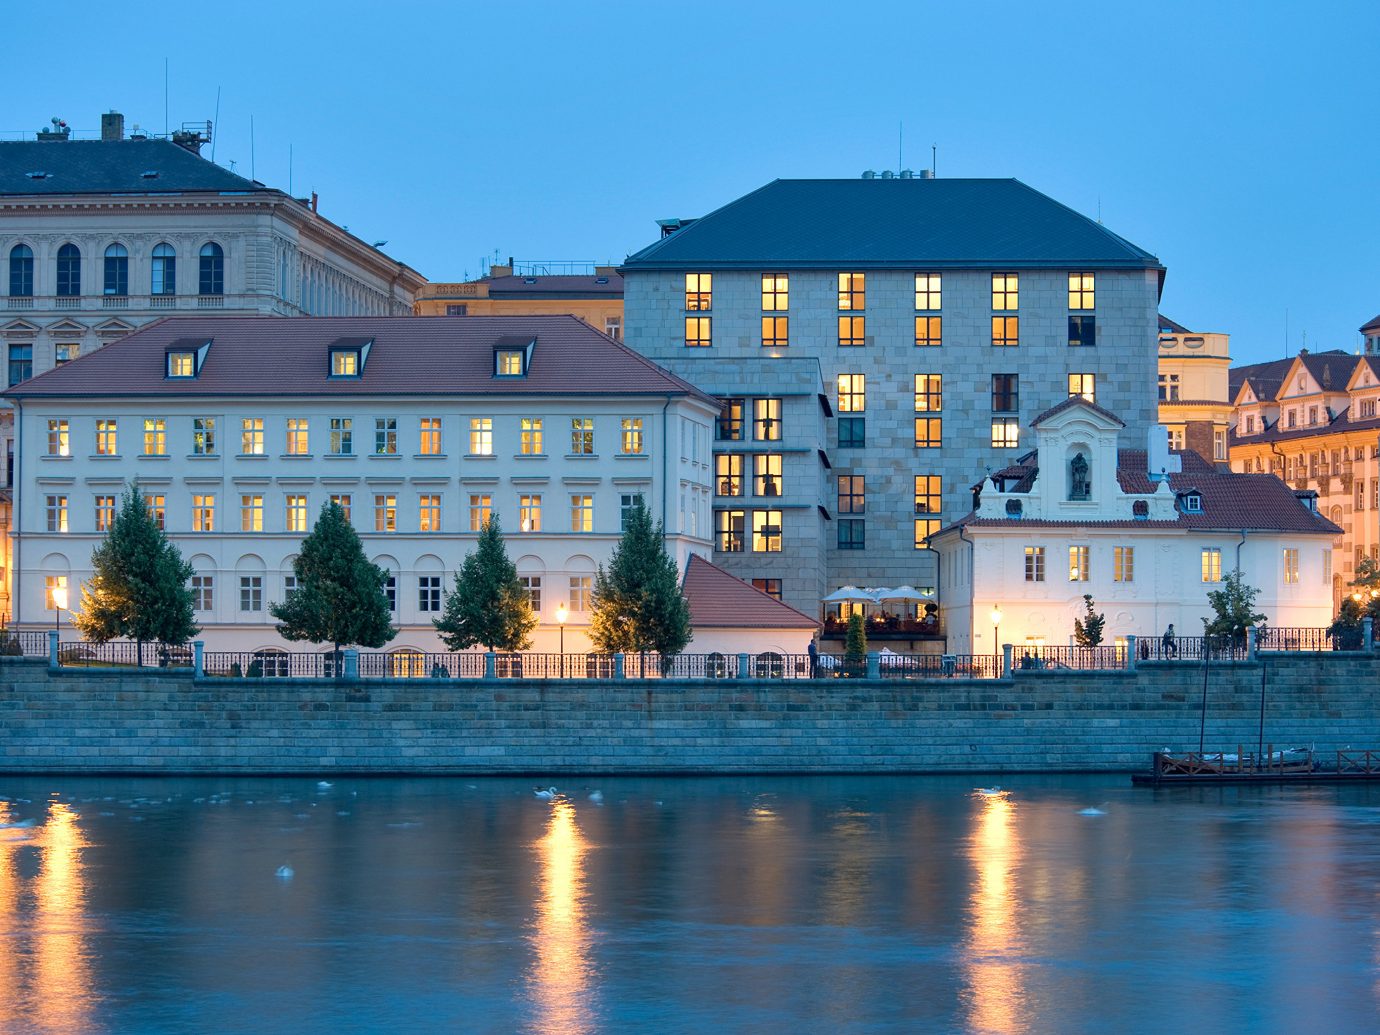 Architecture Buildings Cultural europe Exterior Hotels Landmarks Outdoors Prague water sky building outdoor Town reflection landmark cityscape house River evening Downtown estate dusk waterway palace castle